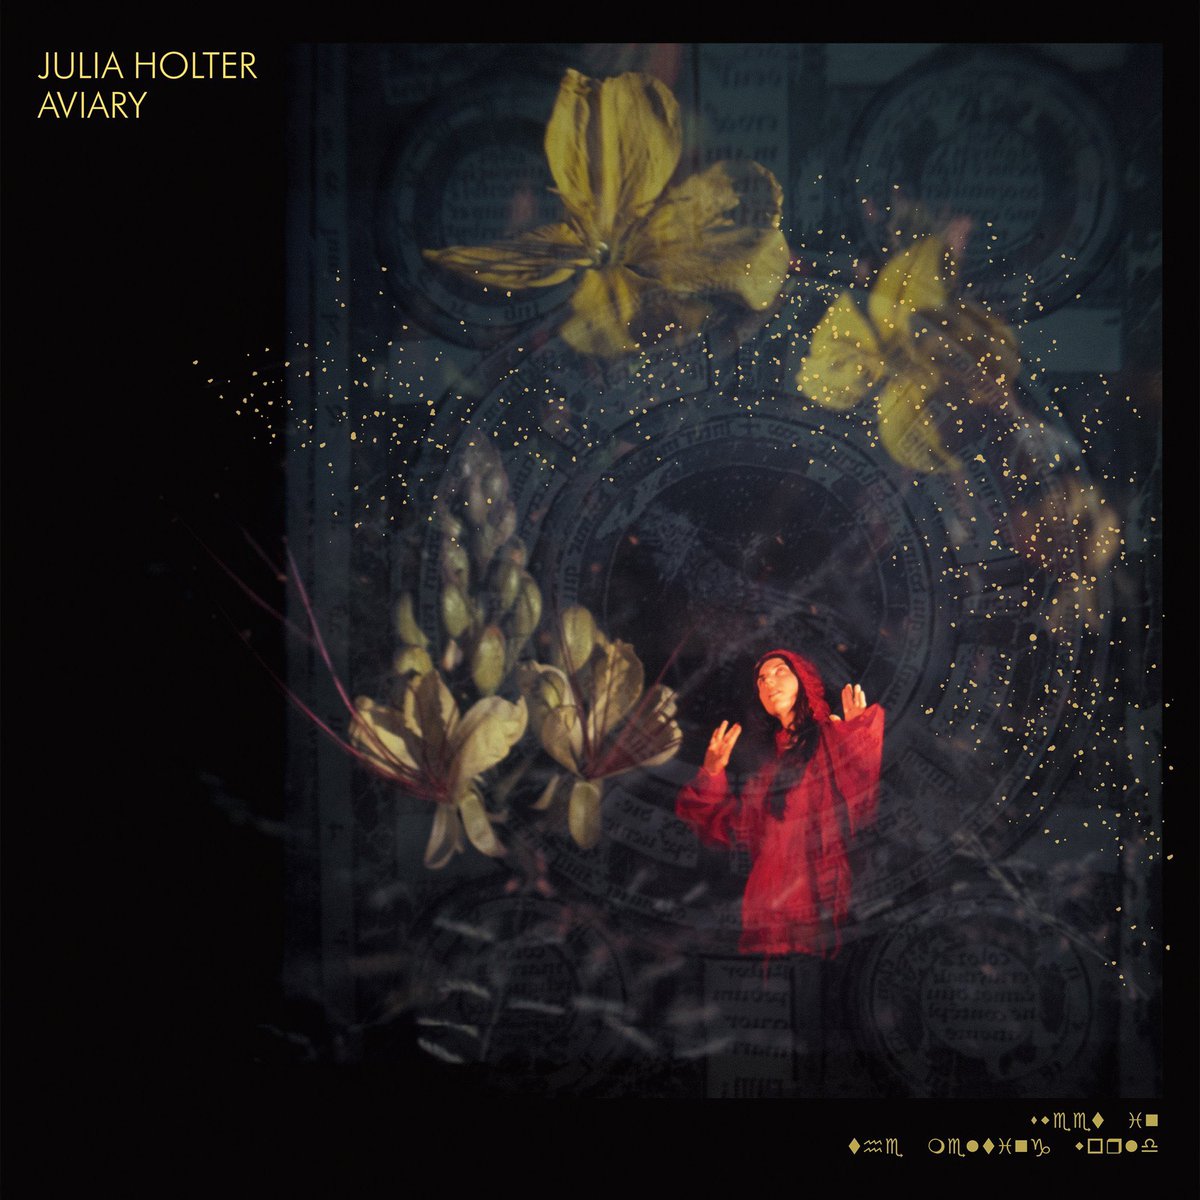 2018AOTY: Julia Holter - Aviary#2: Kacey Musgraves - Golden Hour#3: Kero Kero Bonito - Time ‘n’ Place#4: Against All Logic - 2012 - 2017Total: 103